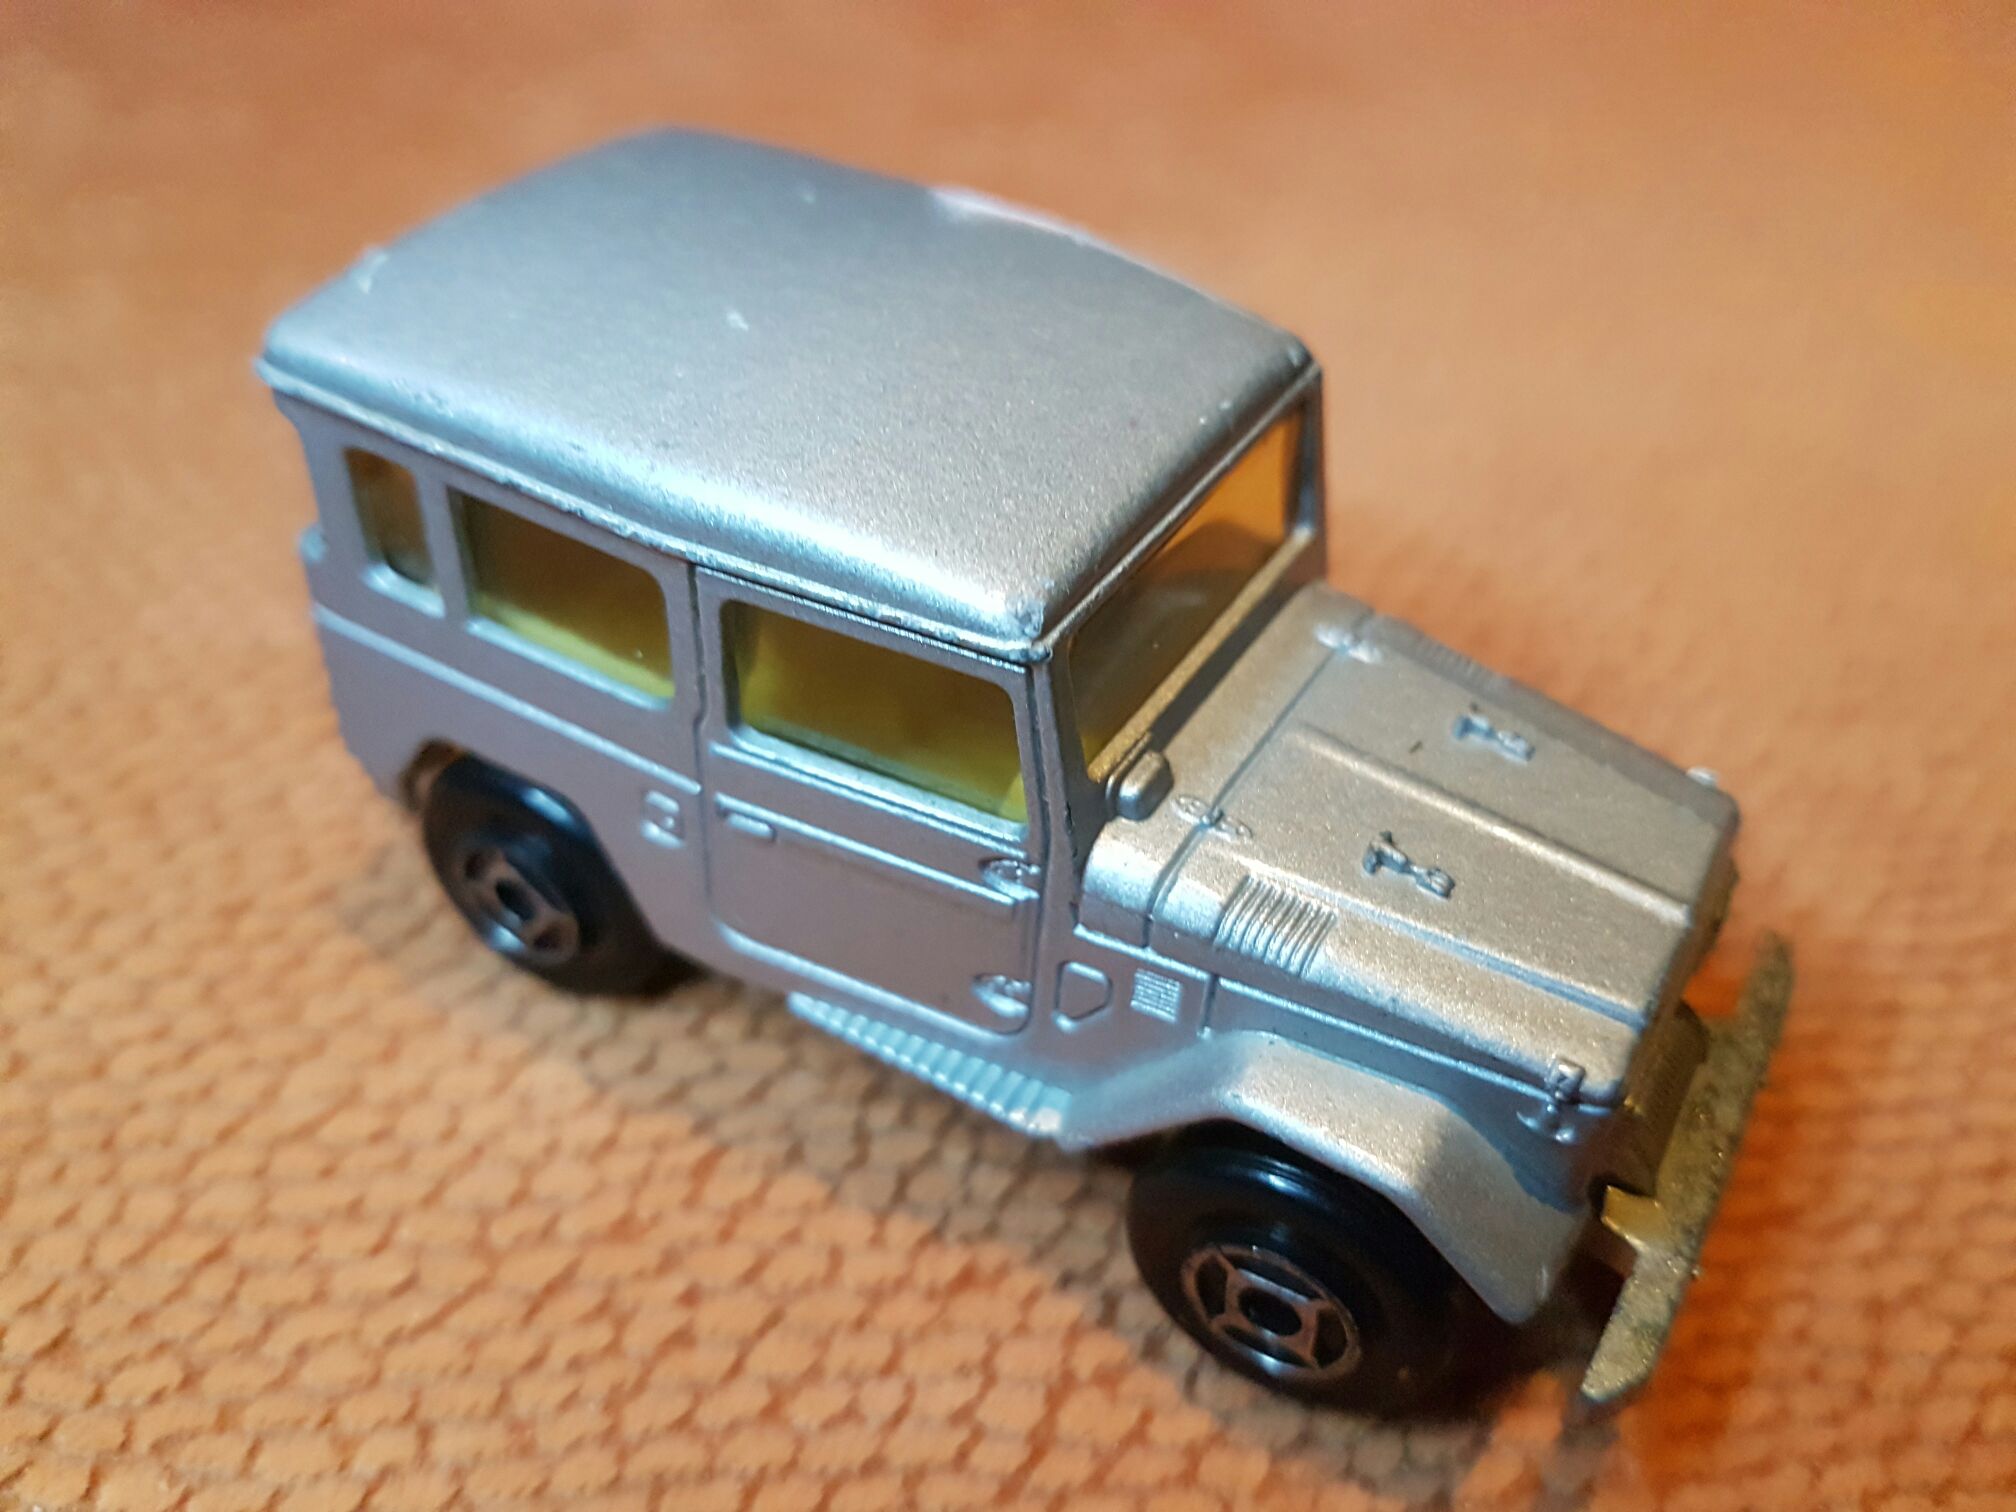 Toyota Jeep (MJ)  toy car collectible - Main Image 1